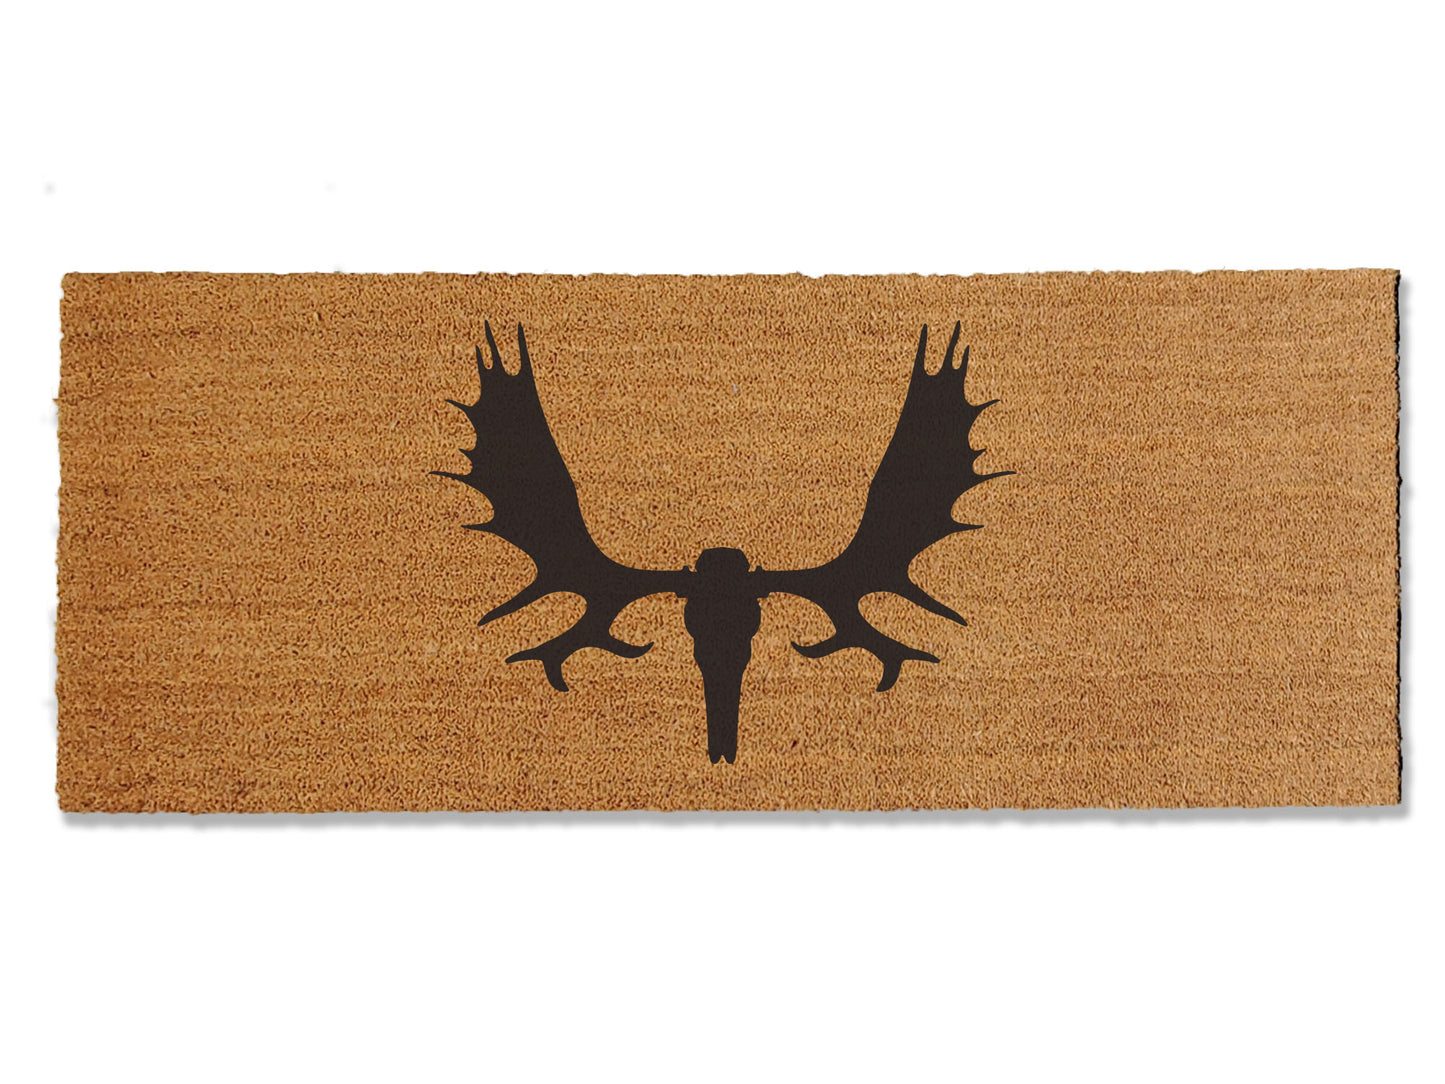 Add a rustic touch to your home or cabin entrance with our coir doormat featuring a moose skull design. Perfect for those seeking a rustic aesthetic, this unique mat is available in multiple sizes. Beyond its distinctive appearance, it excels at trapping dirt, making it a practical and stylish addition to enhance your entryway.